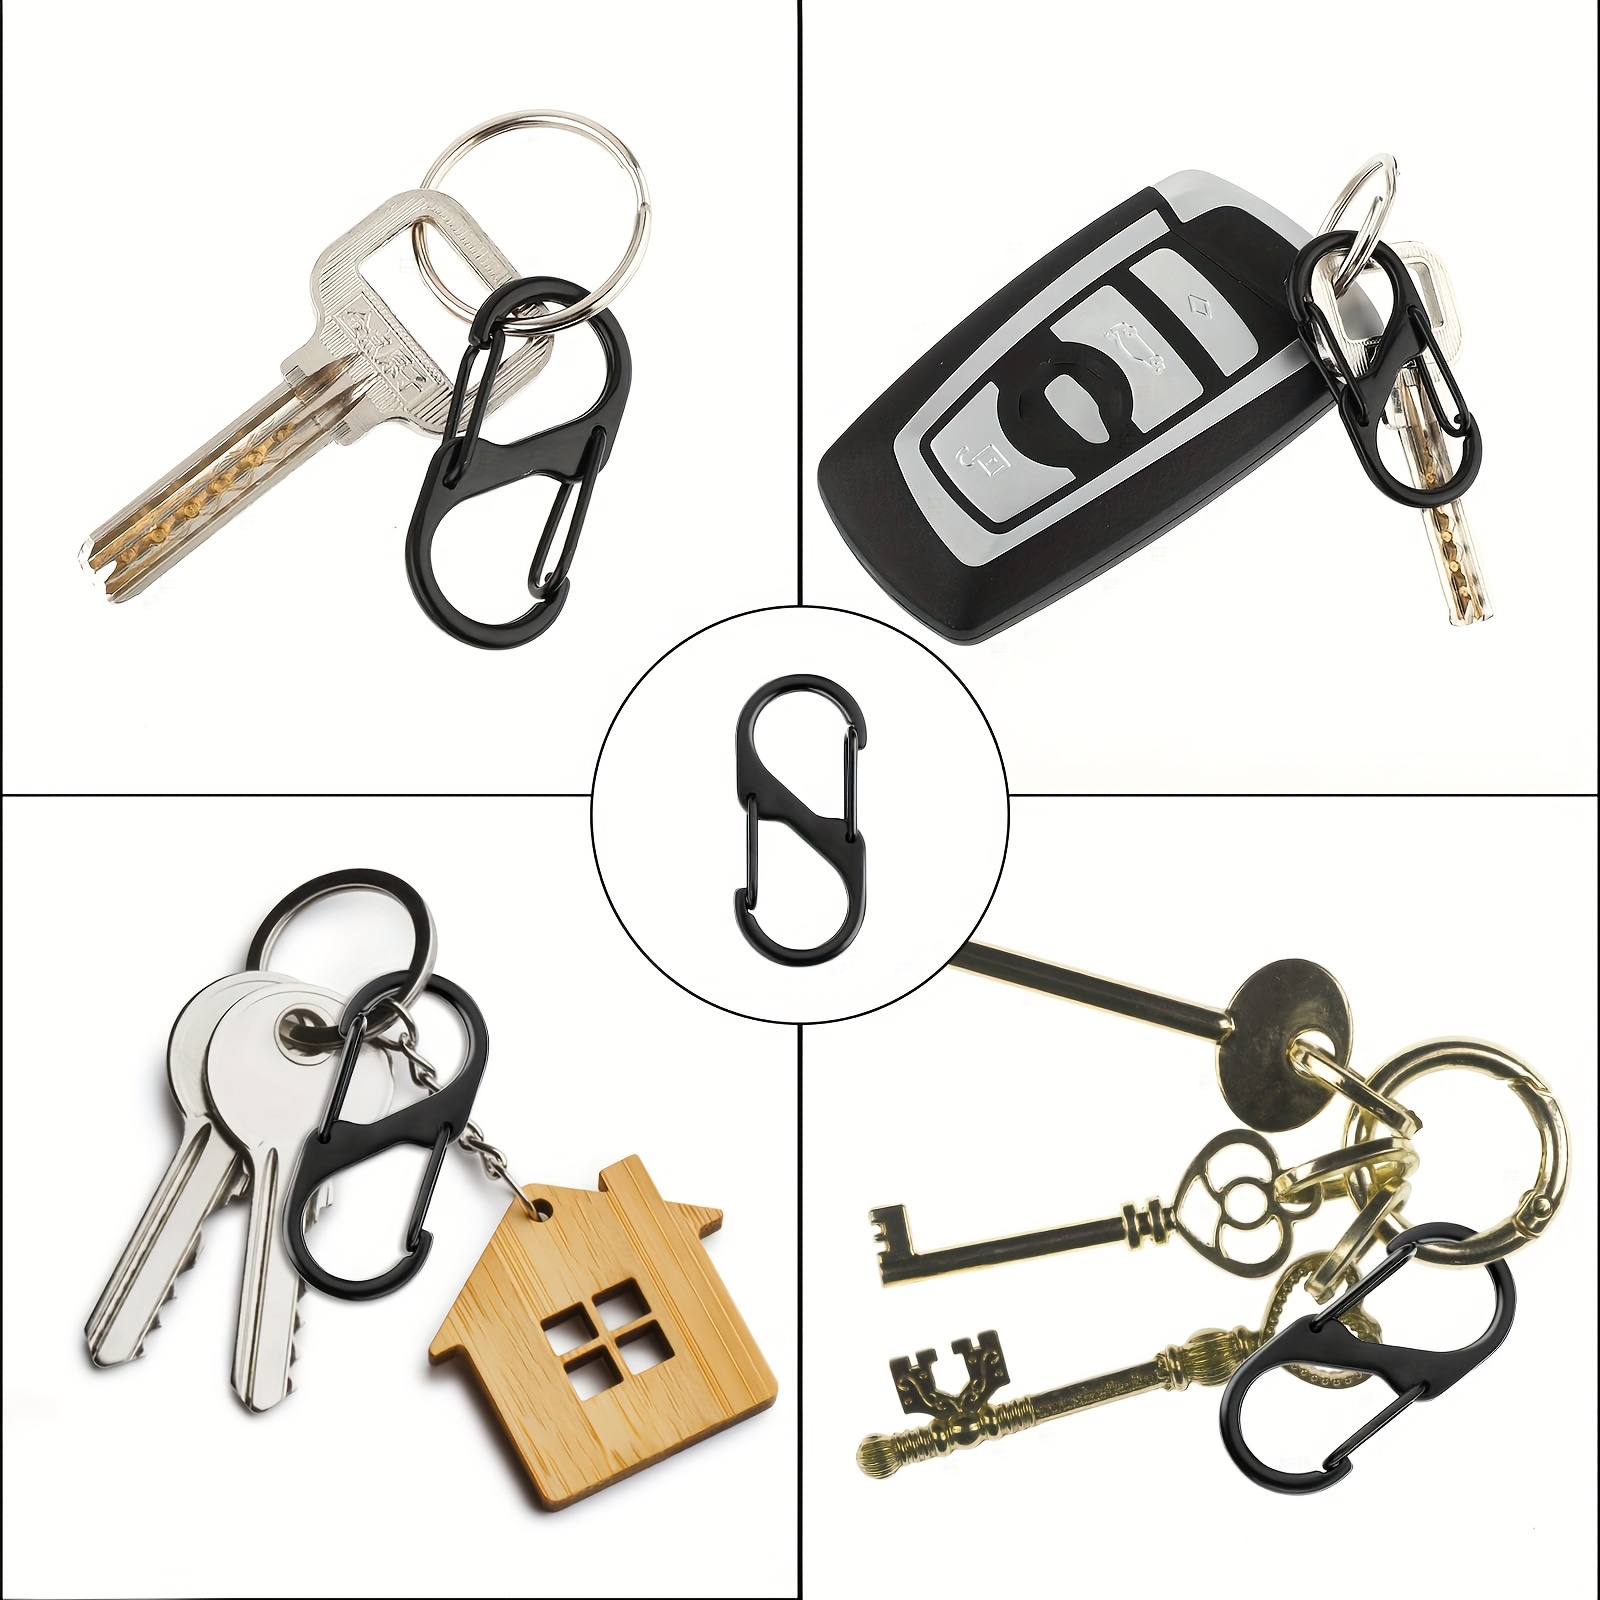 6pcs S Shaped Carabiner Buckle Clip Mini Alloy Metal Snap Hook Keychain  Keyring Camping Fishing Traveling Outdoor Sports, 90 Days Buyer Protection